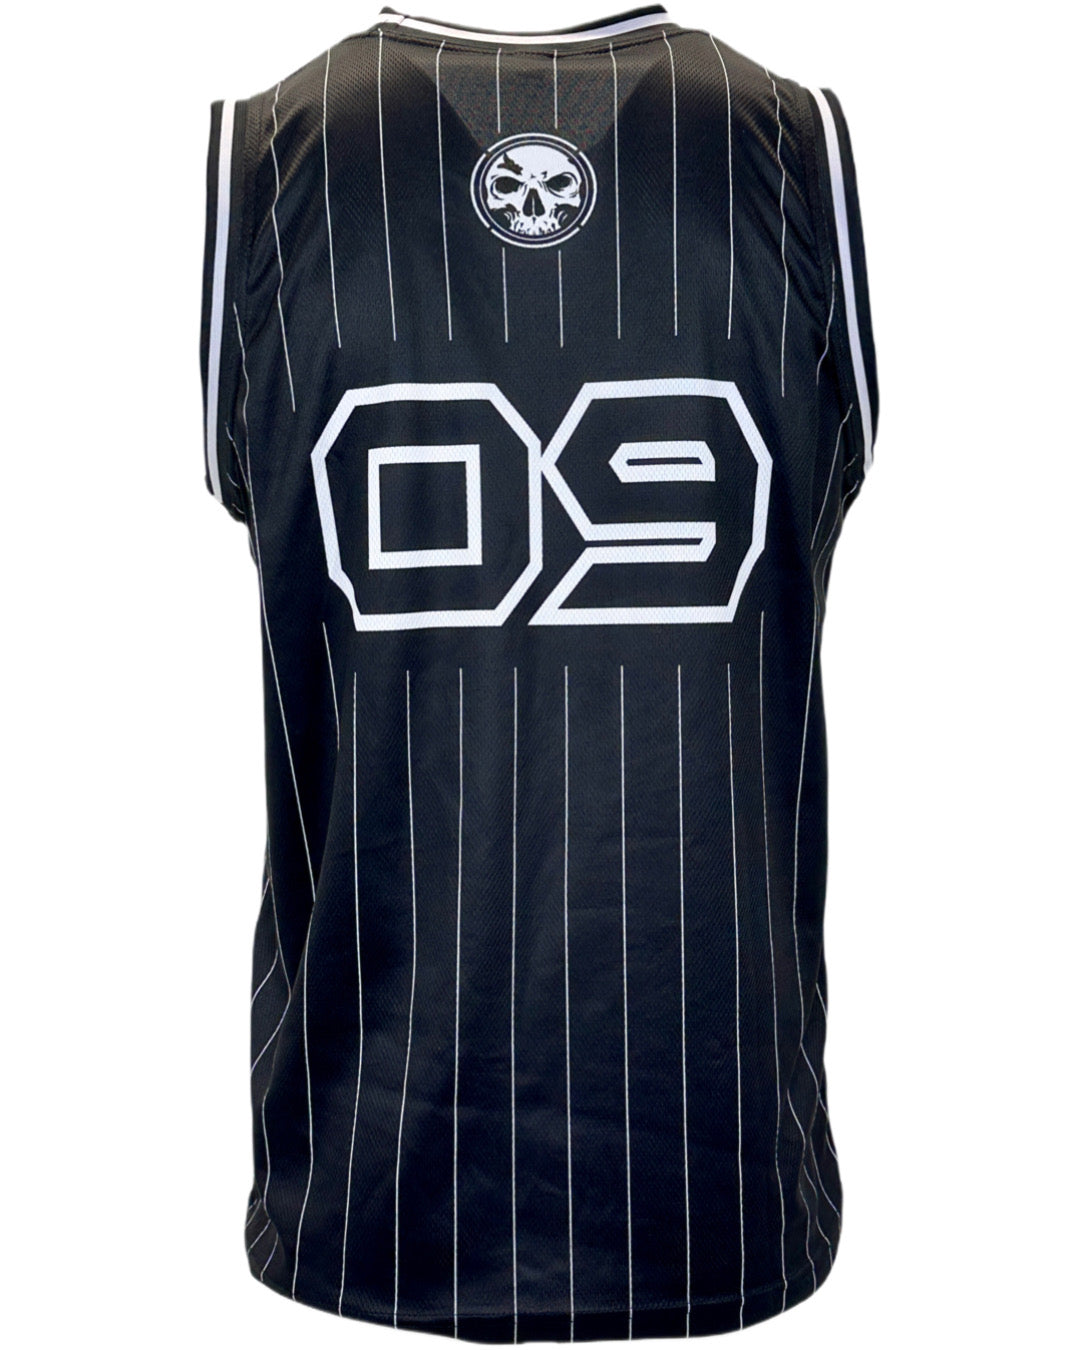 NOW AVAILABLE!  Men's Black "09" Jersey - White Pinstripes